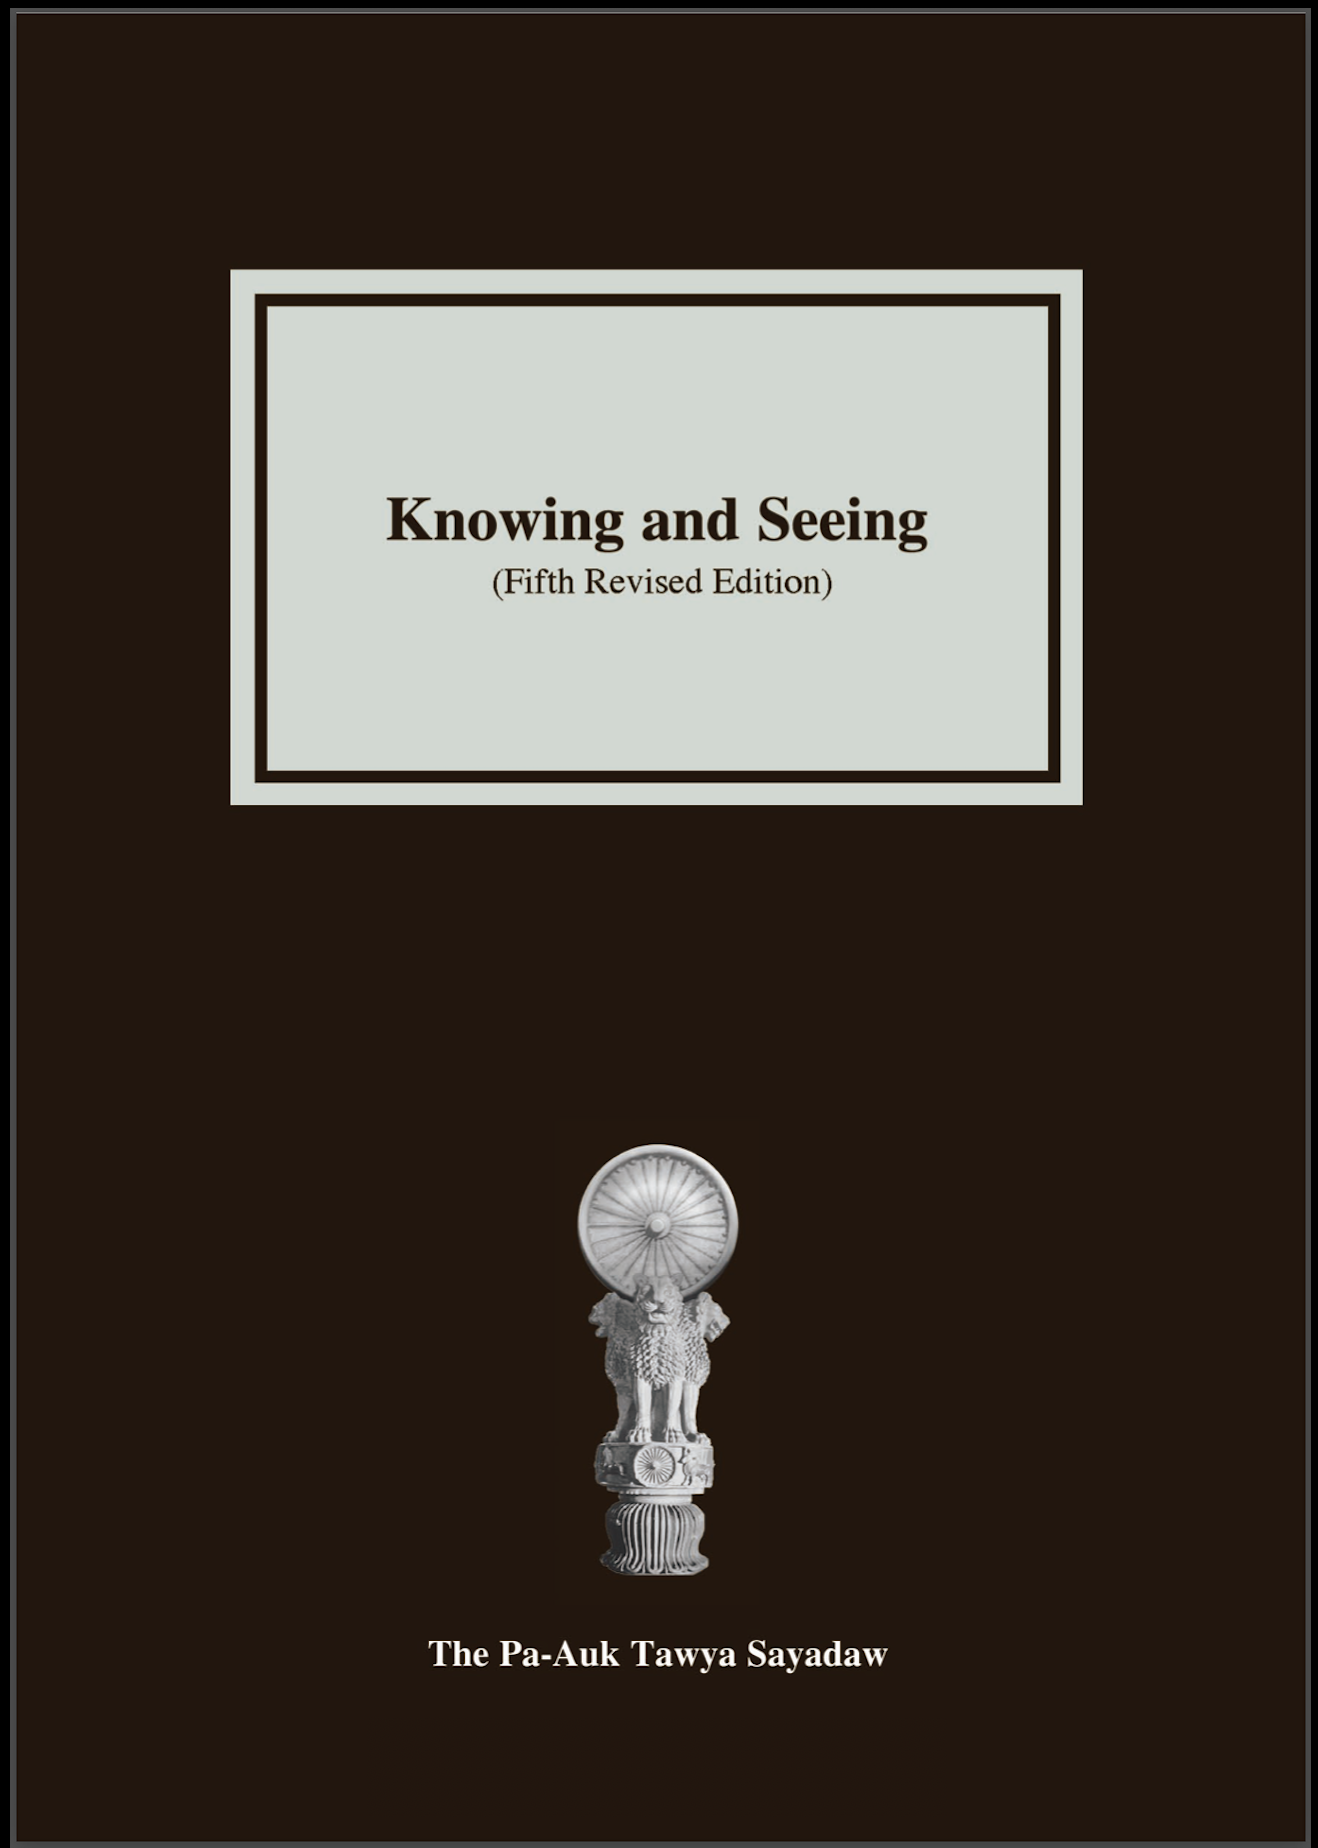 How You Discern Materiality (Knowing & Seeing – Talk 4 by Pa-Auk Sayadaw)